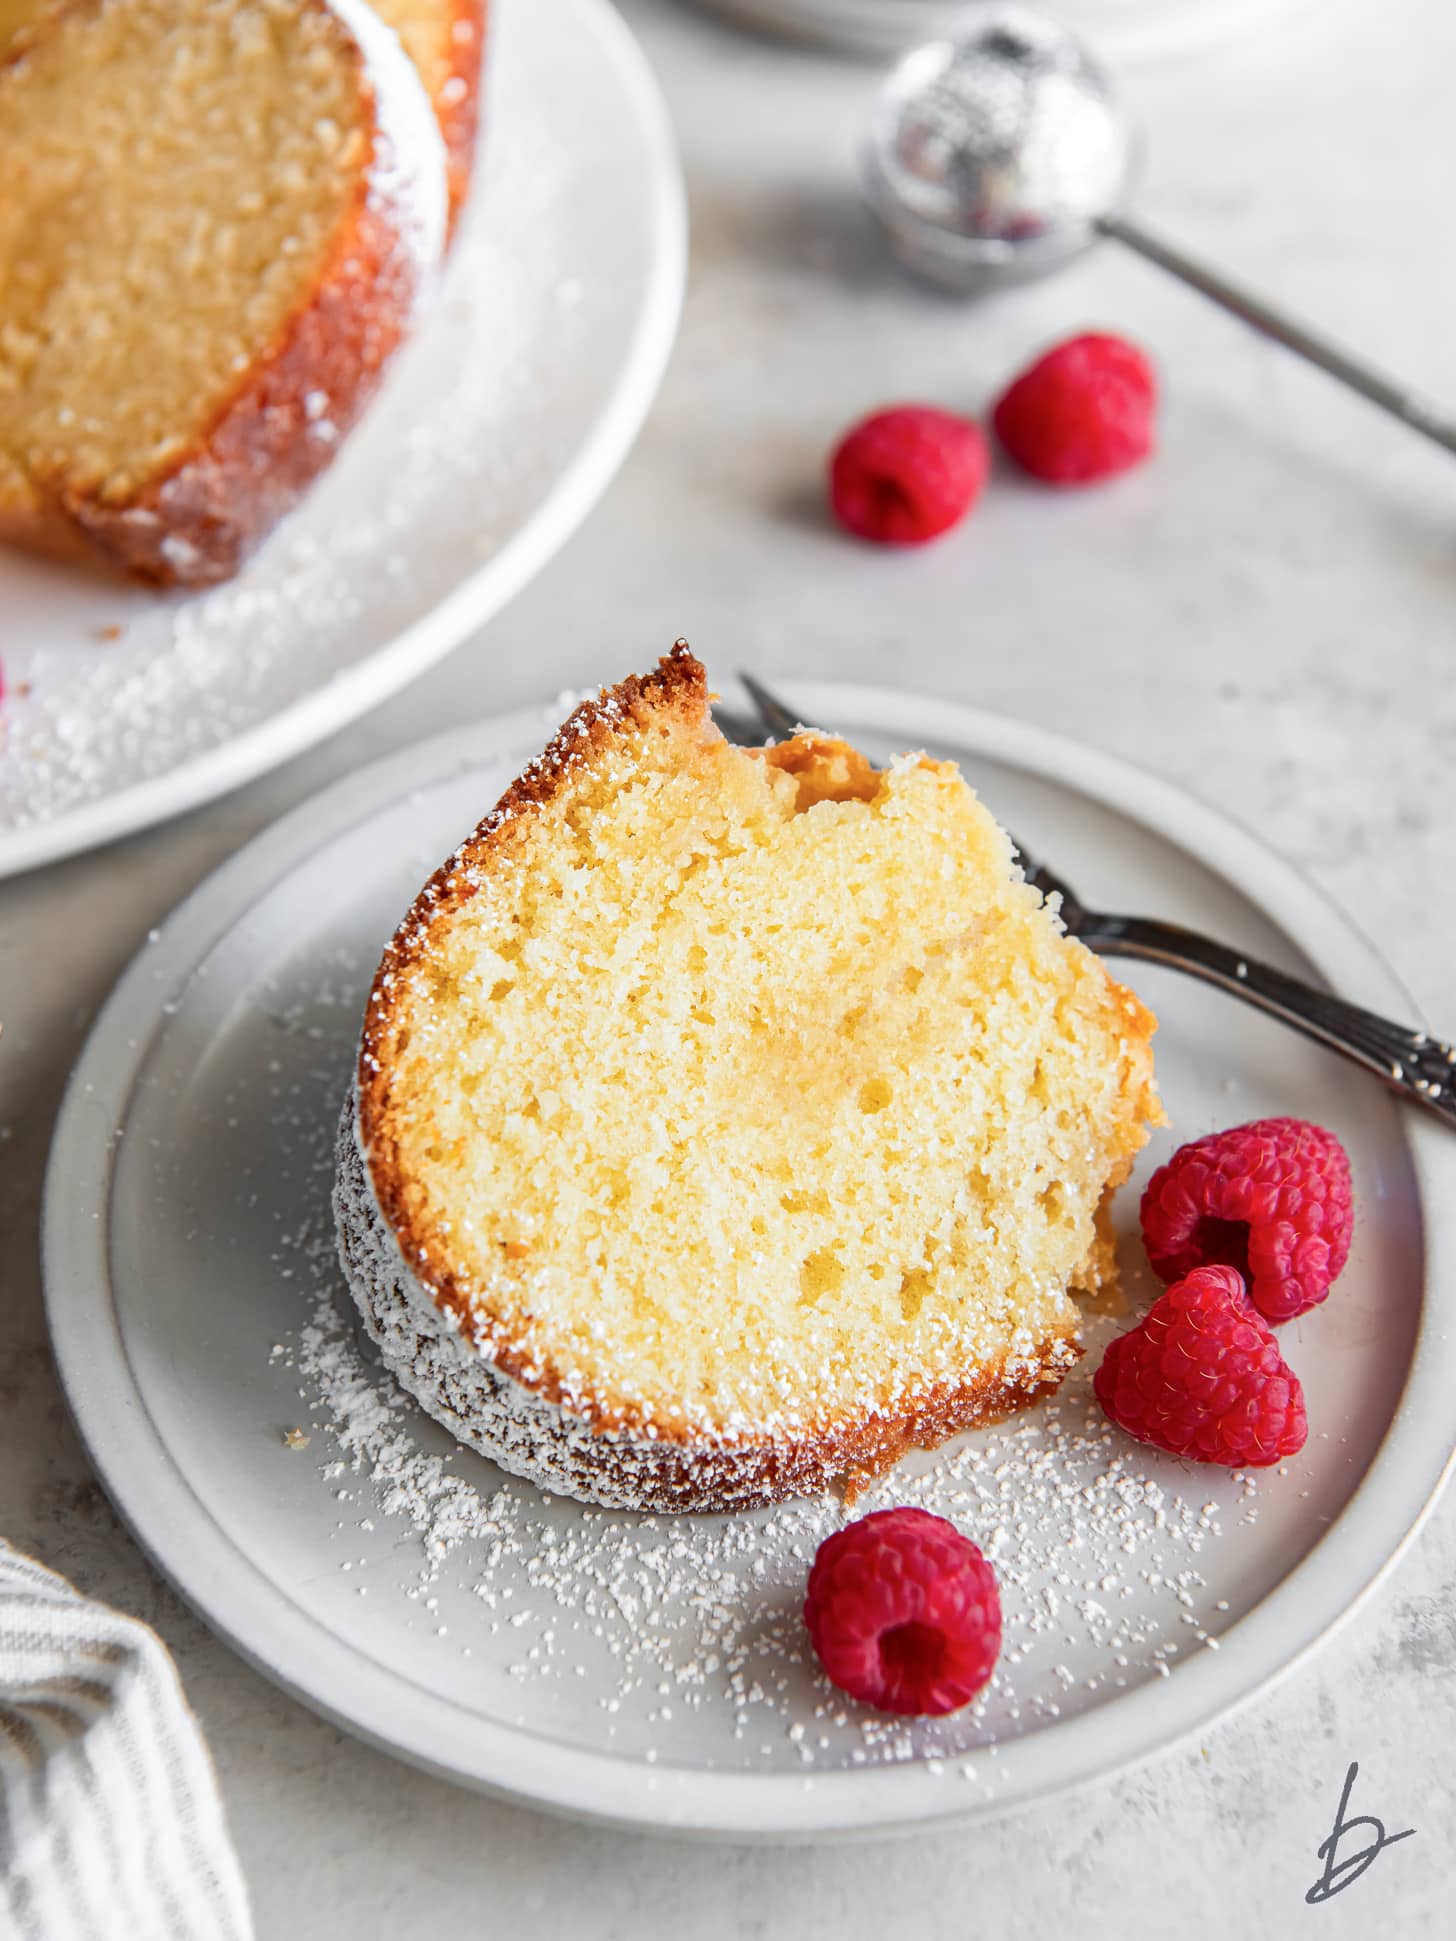 slice of kentucky butter cake on a plate with a few fresh raspberries.